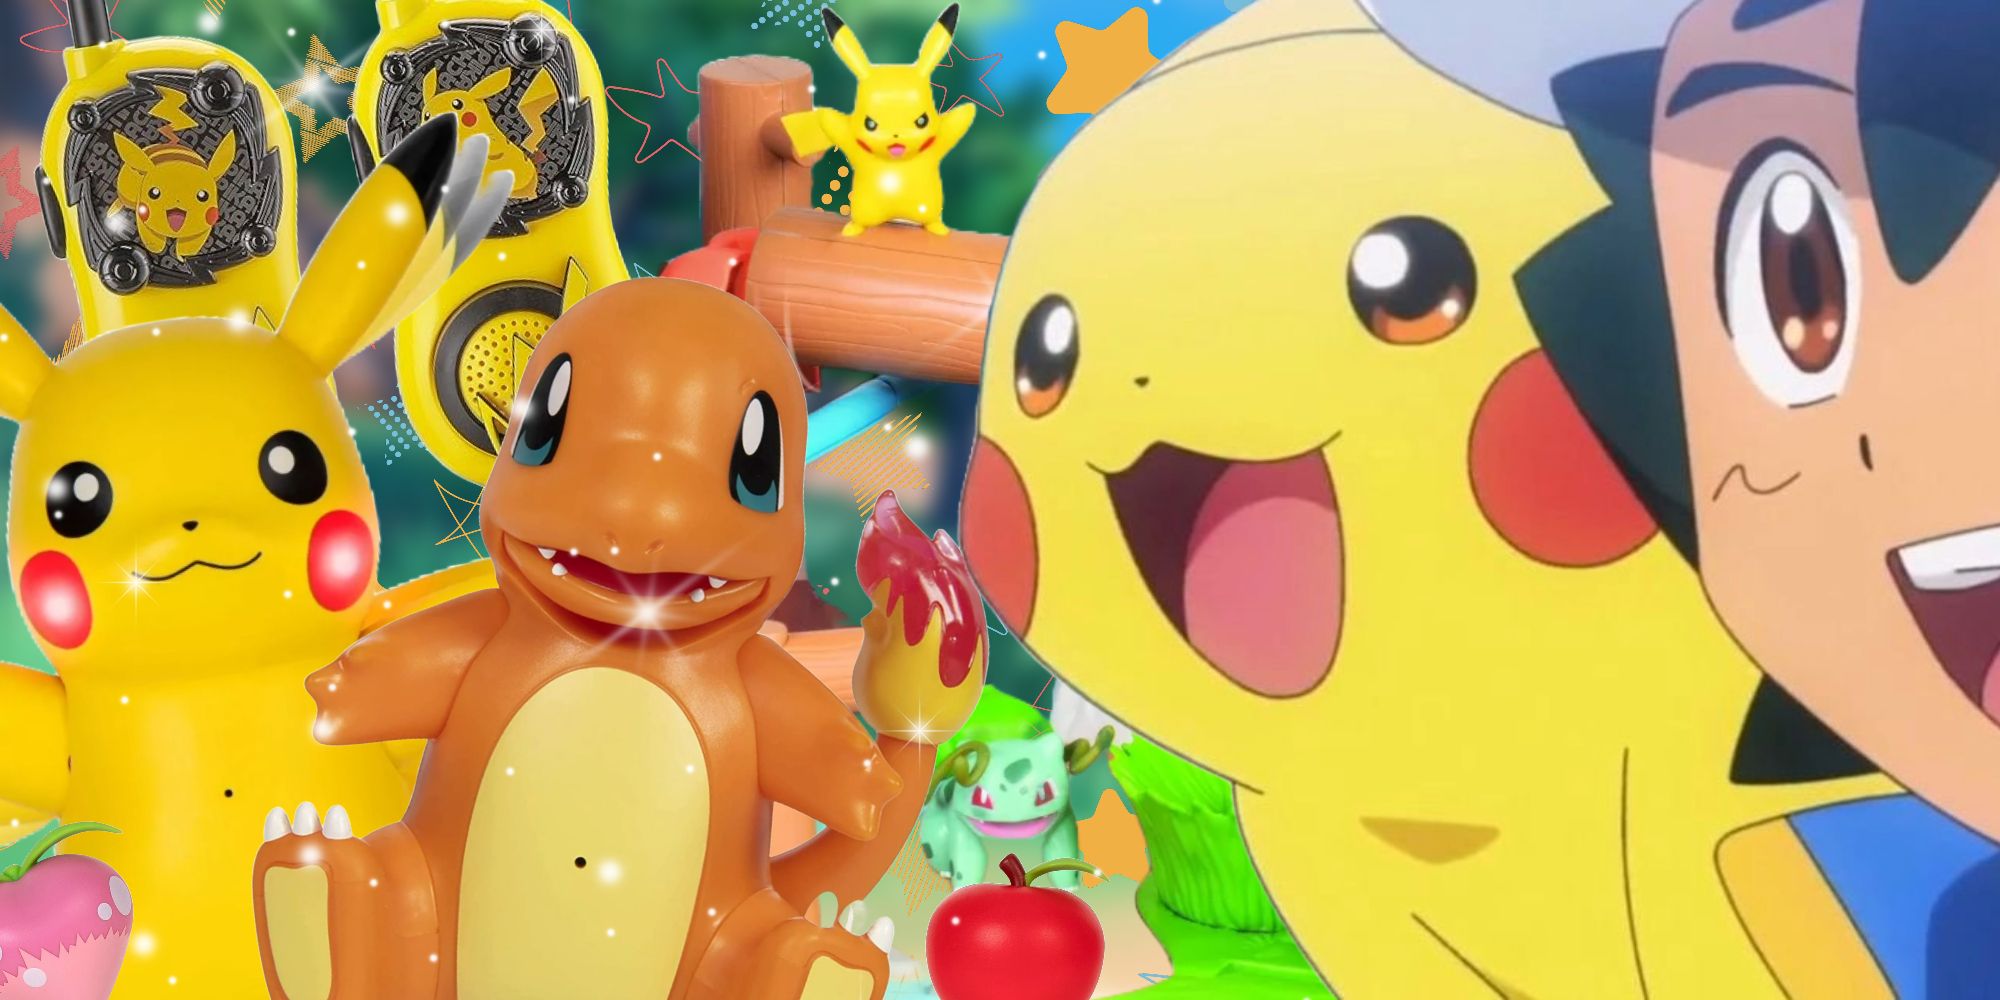 Ash and Pikachu look excitedly towards Pokemon figures, toy sets, and  Pikachu walkie talkies.